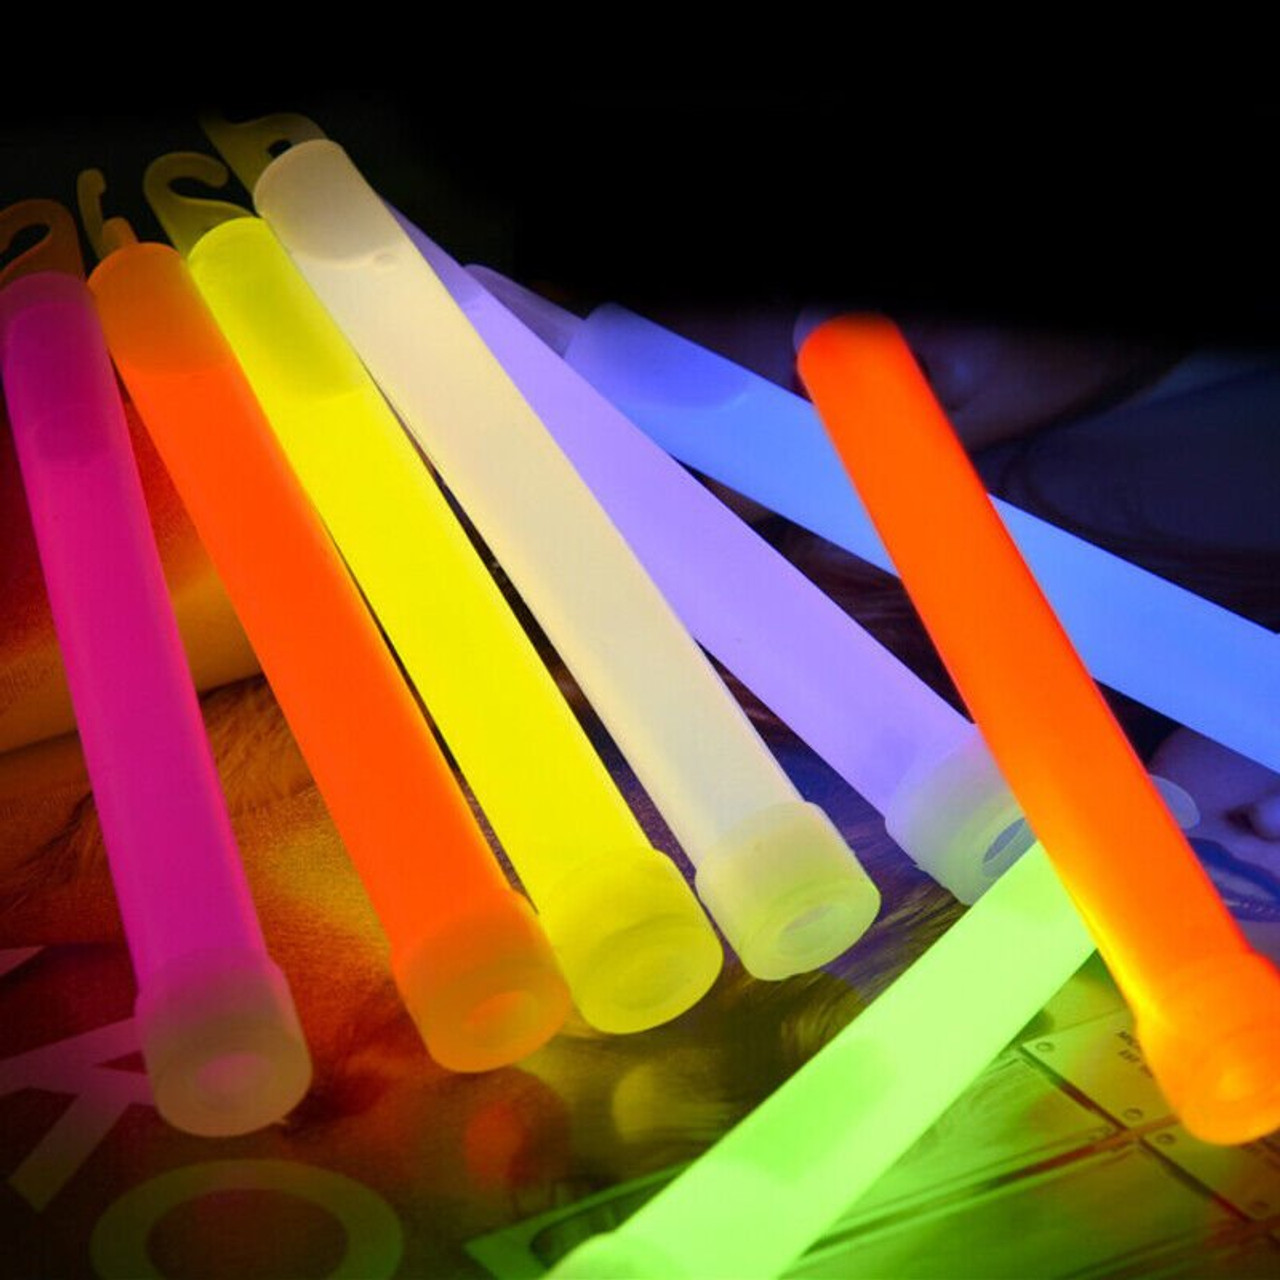 100 Pcs x 6 Inch Mixed Glow sticks Bulk Party Rave Light Disco Glow in The Dark - Battery Mate